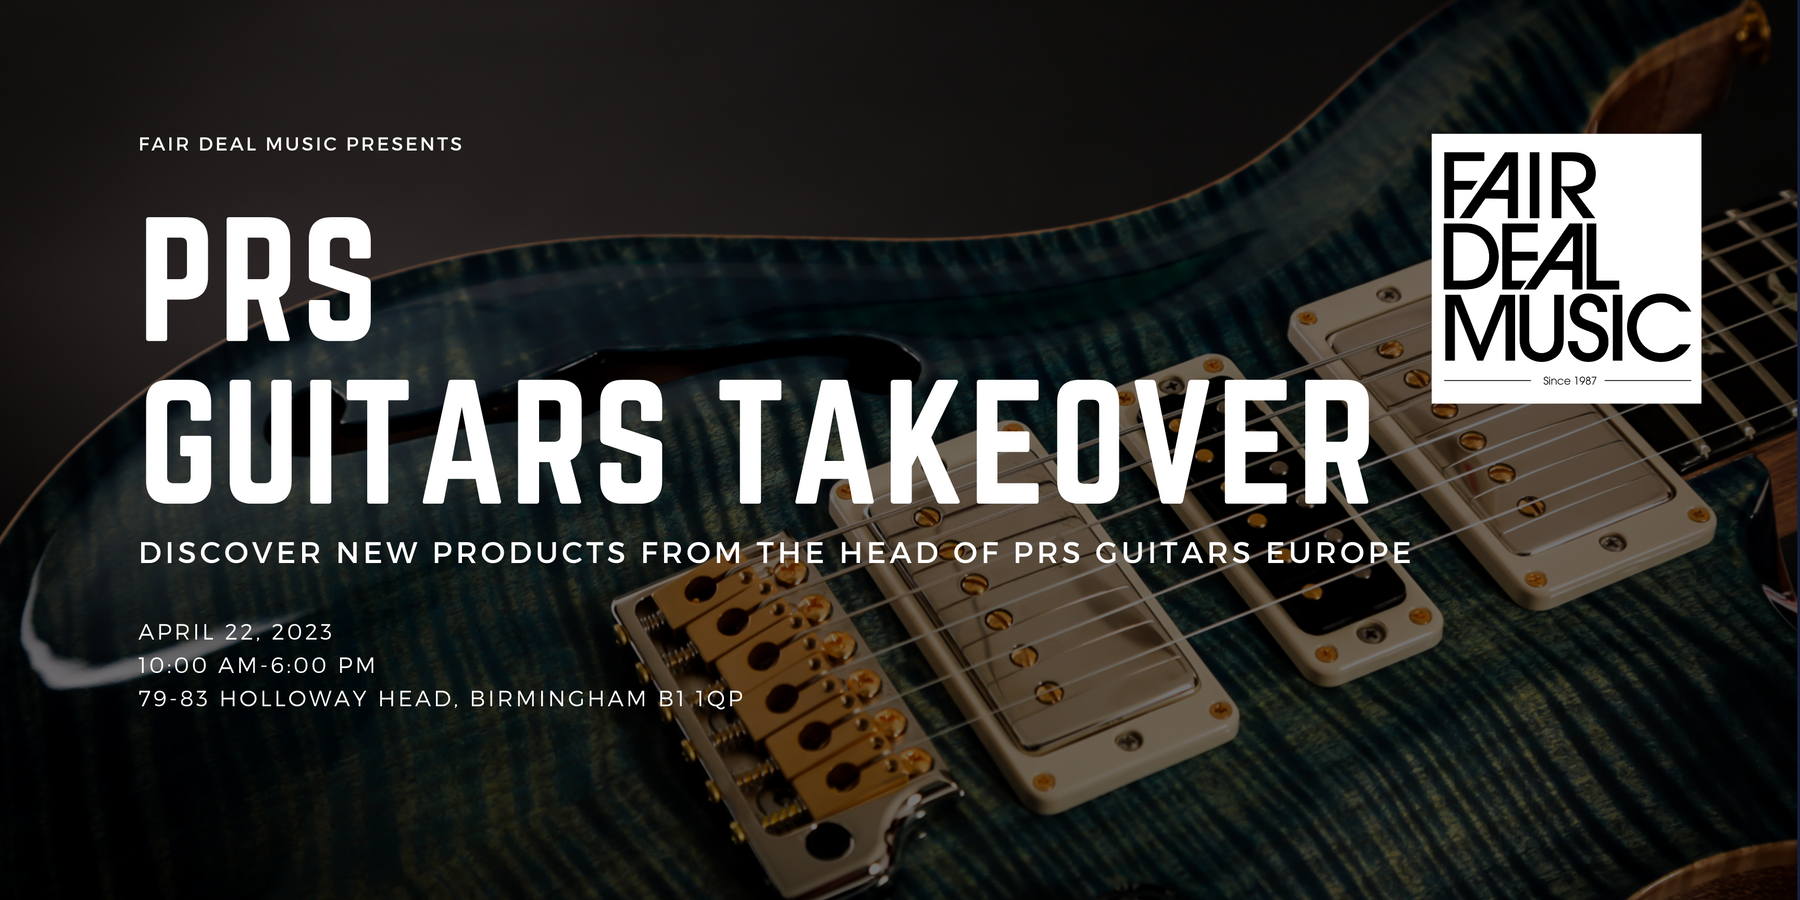 PRS Guitars Takeover at Fair Deal Music: More PRS Guitars Than Anywhere Else in the UK